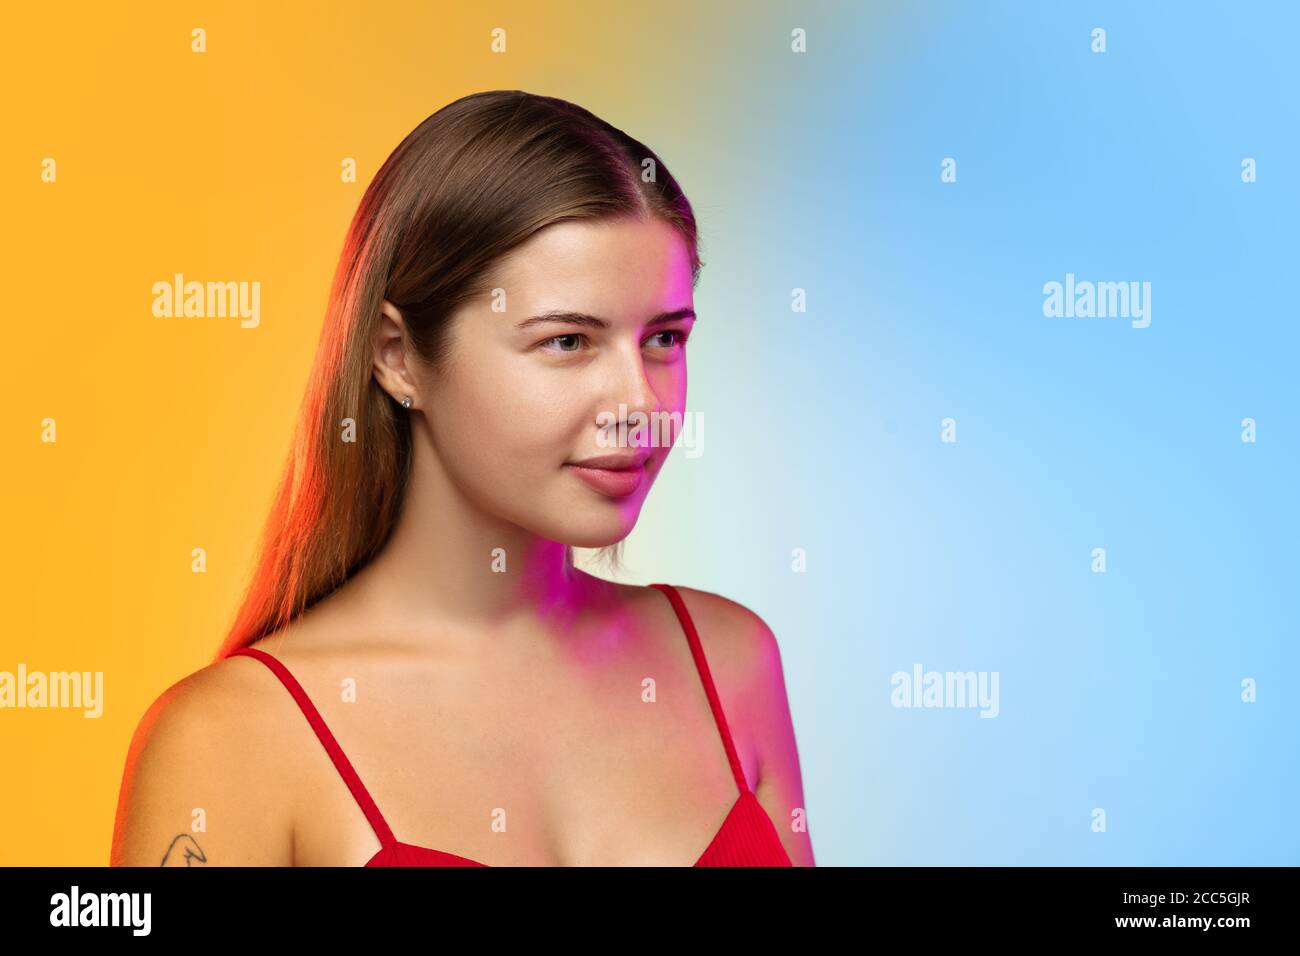 Suspecting. Close up caucasian young woman's portrait on gradient studio background in neon. Beautiful female model in casual style. Concept of human emotions, facial expression, youth, sales, ad. Stock Photo